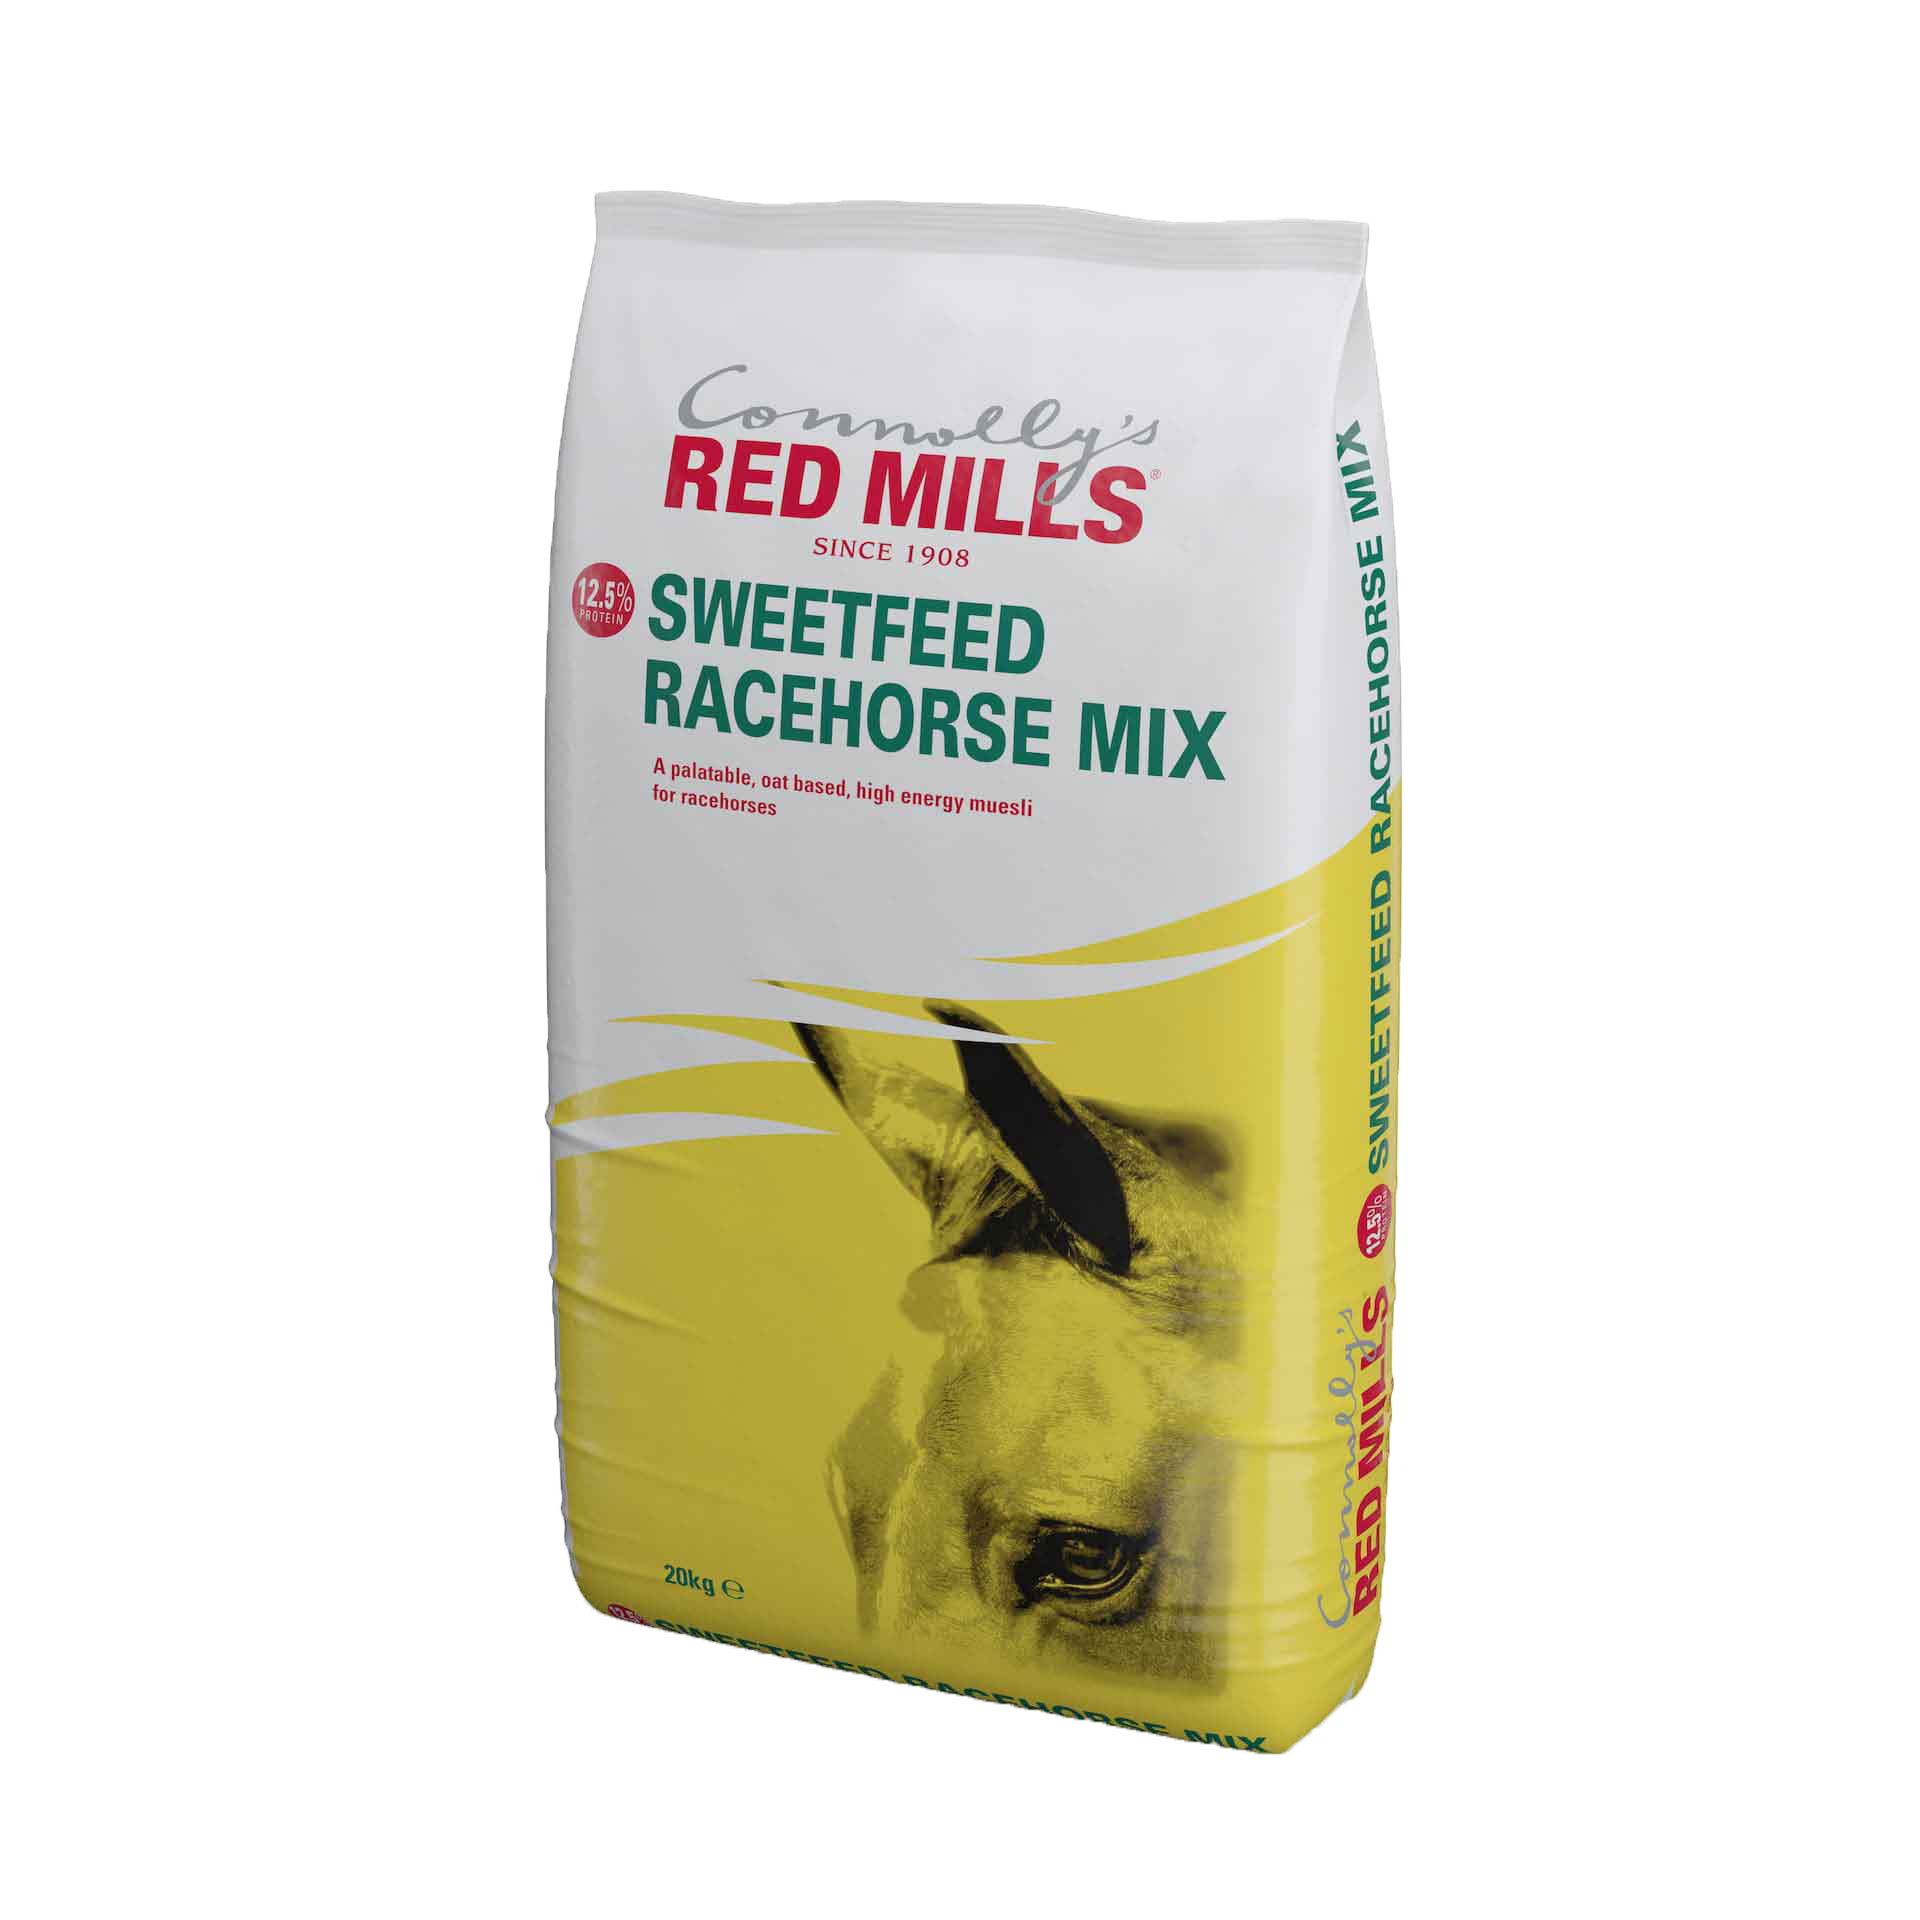 RED MILLS 12.5% Sweetfeed Racehorse Mix